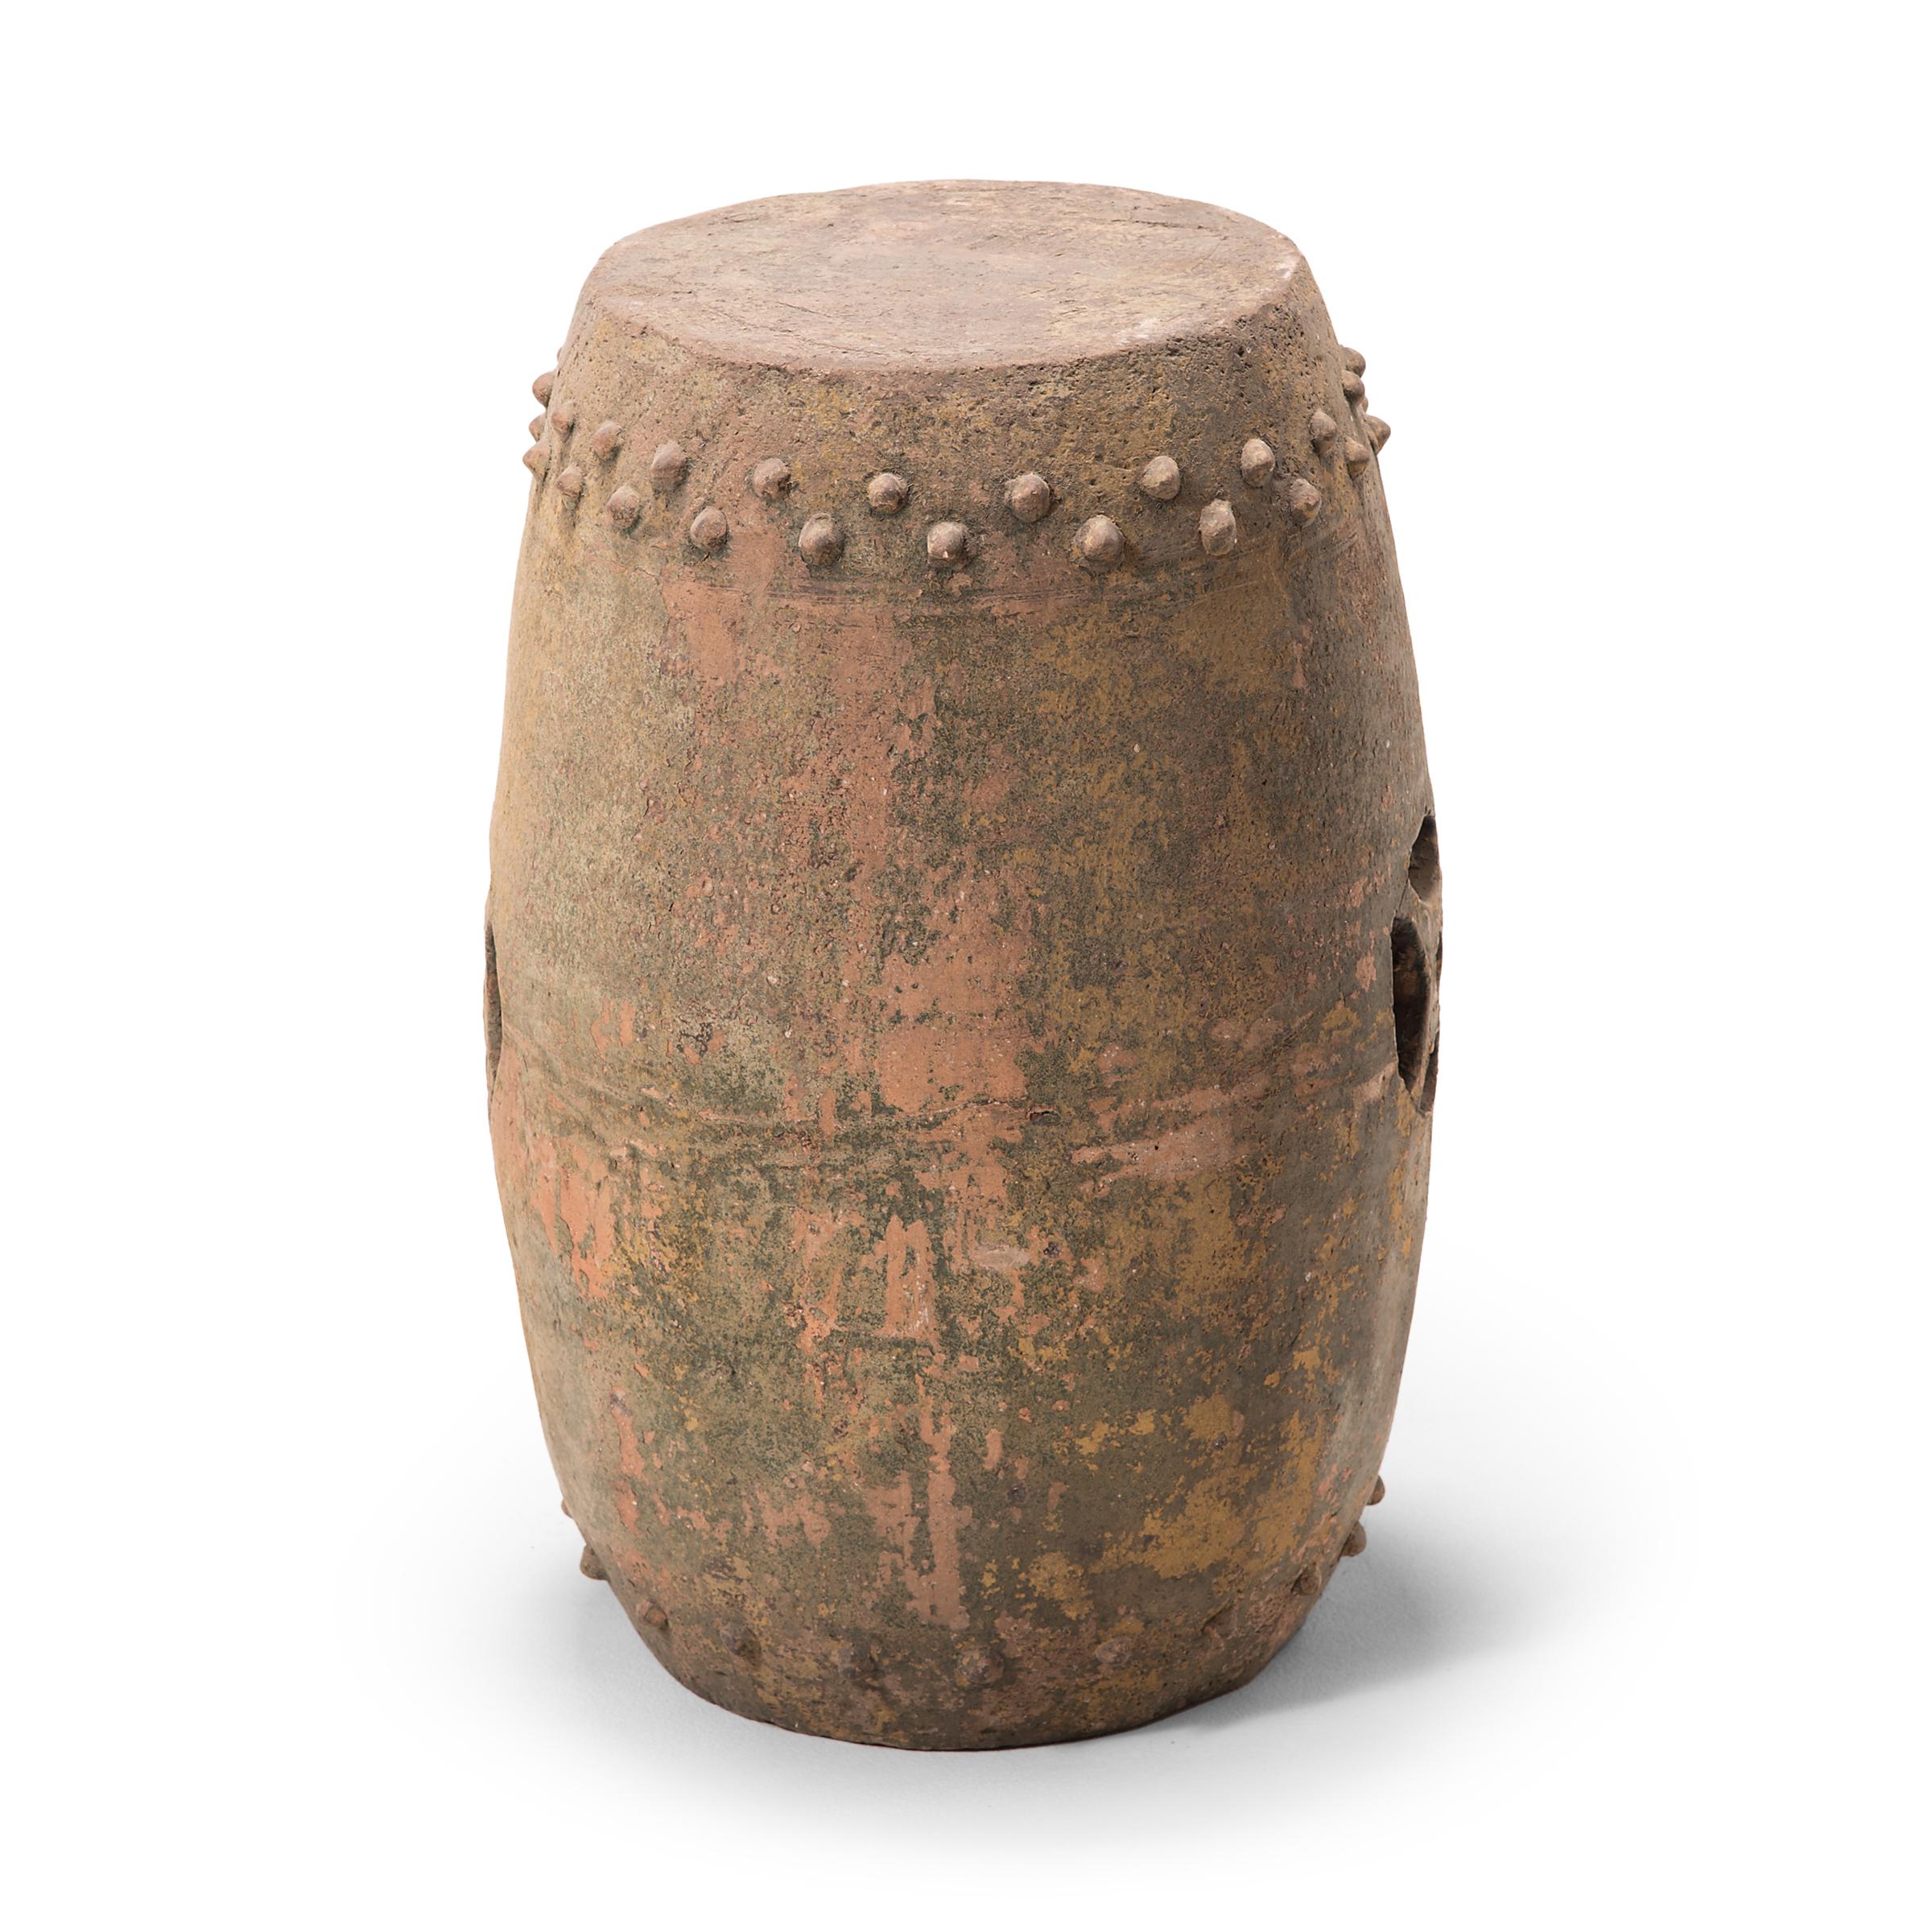 This early 20th century terracotta garden stool was created in Pingyao, an ancient, respected city in China's Shanxi province. With a history dating as far back as c. 800 B.C., Pingyao is widely known for its well-preserved Ming- and Qing-dynasty